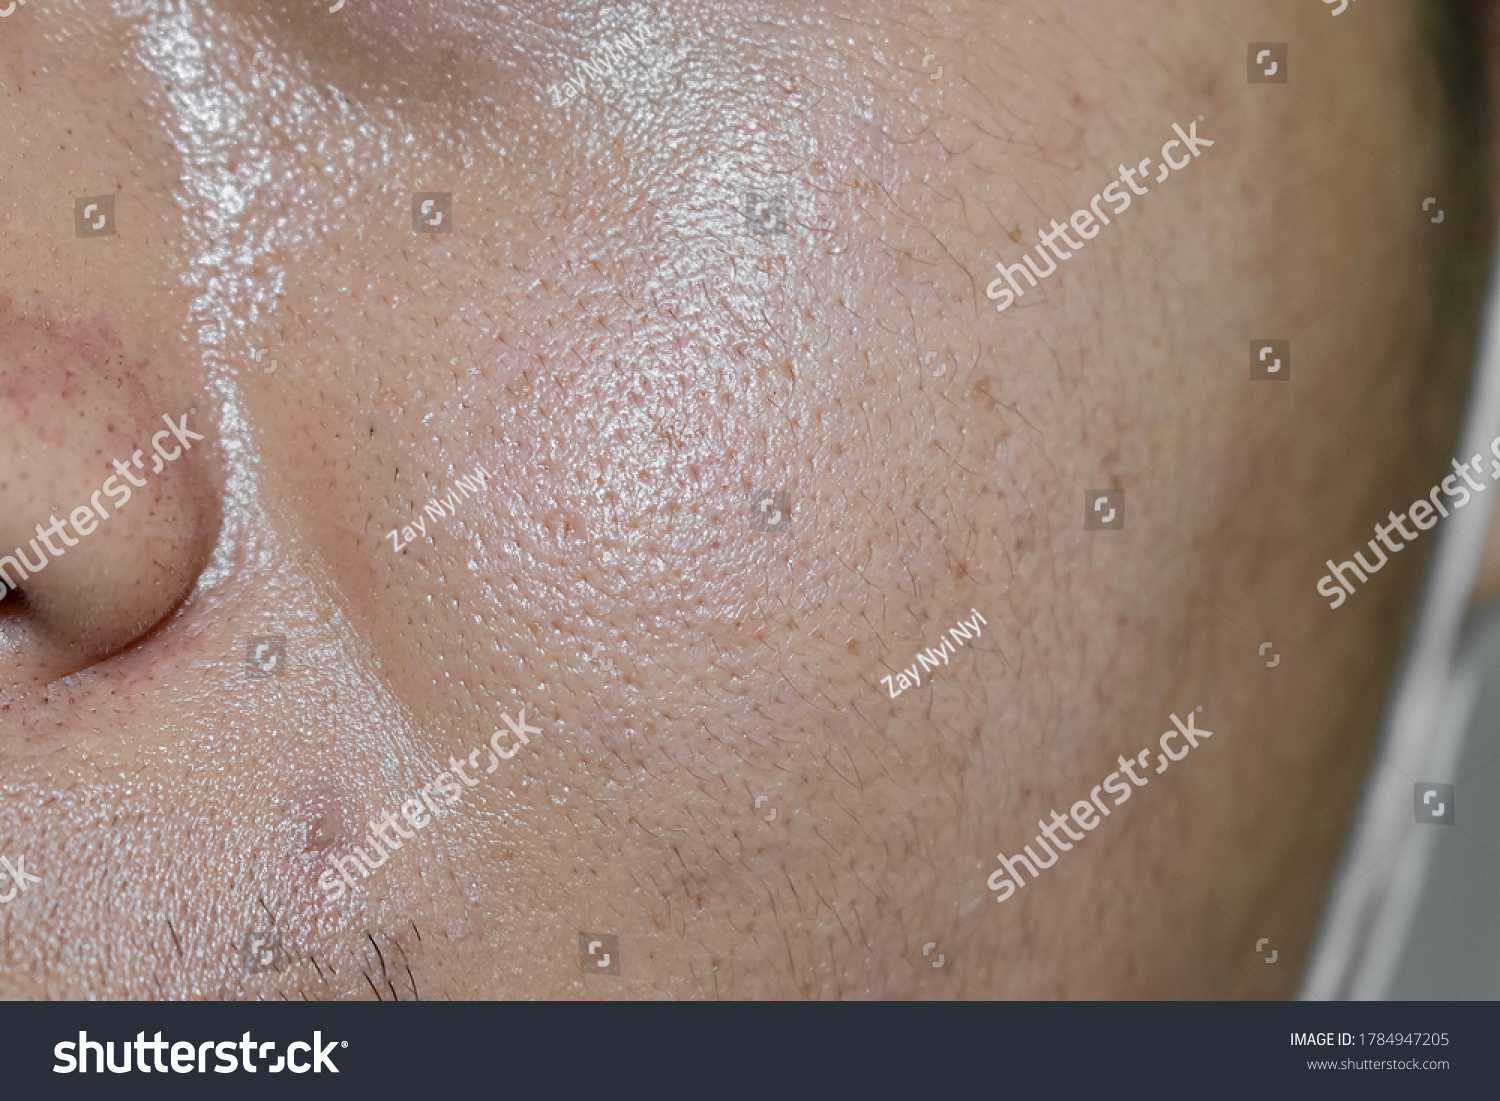 Oily and fair skin, wide pores of Southeast Asian, Myanmar or Korean adult young man. Oily skin is the result of the overproduction of sebum from sebaceous glands. #1784947205